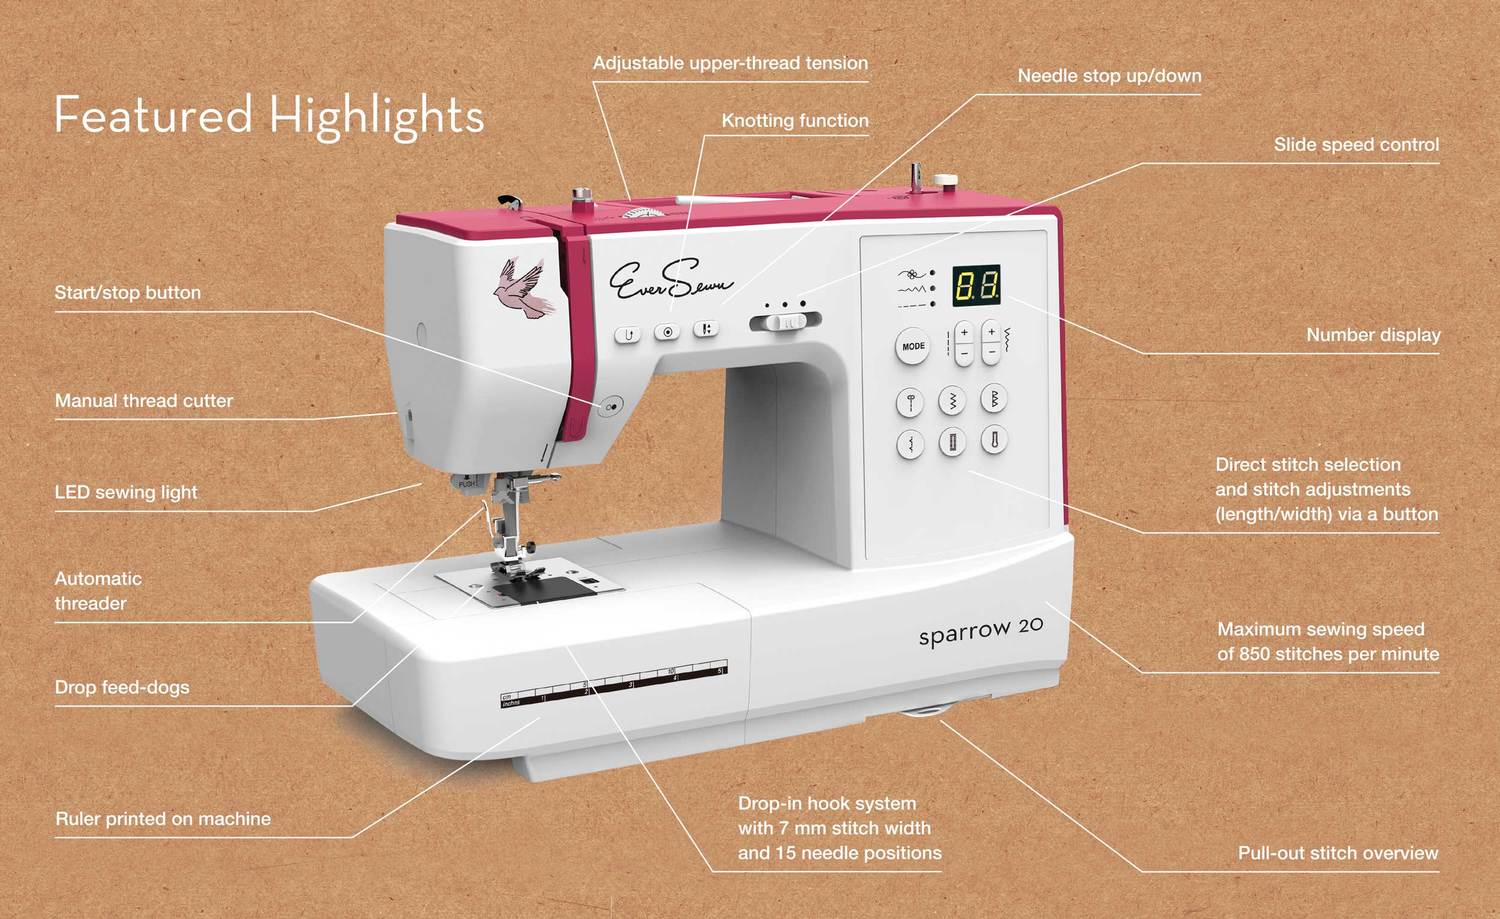 image detailing the features of the EverSewn Sparrow 20 80 Stitch Computerized Sewing Machine including adjustable upper thread tension, knotting function, needle stop up/down, slide speed control, number display, direct stitch selection and stitch adjustments via a button, maximum sewing speed of 850 stitches per minute, pull out stitch overview, drop in hook system with 7mm stitch width and 15 needle positions, ruler printed on machine and more